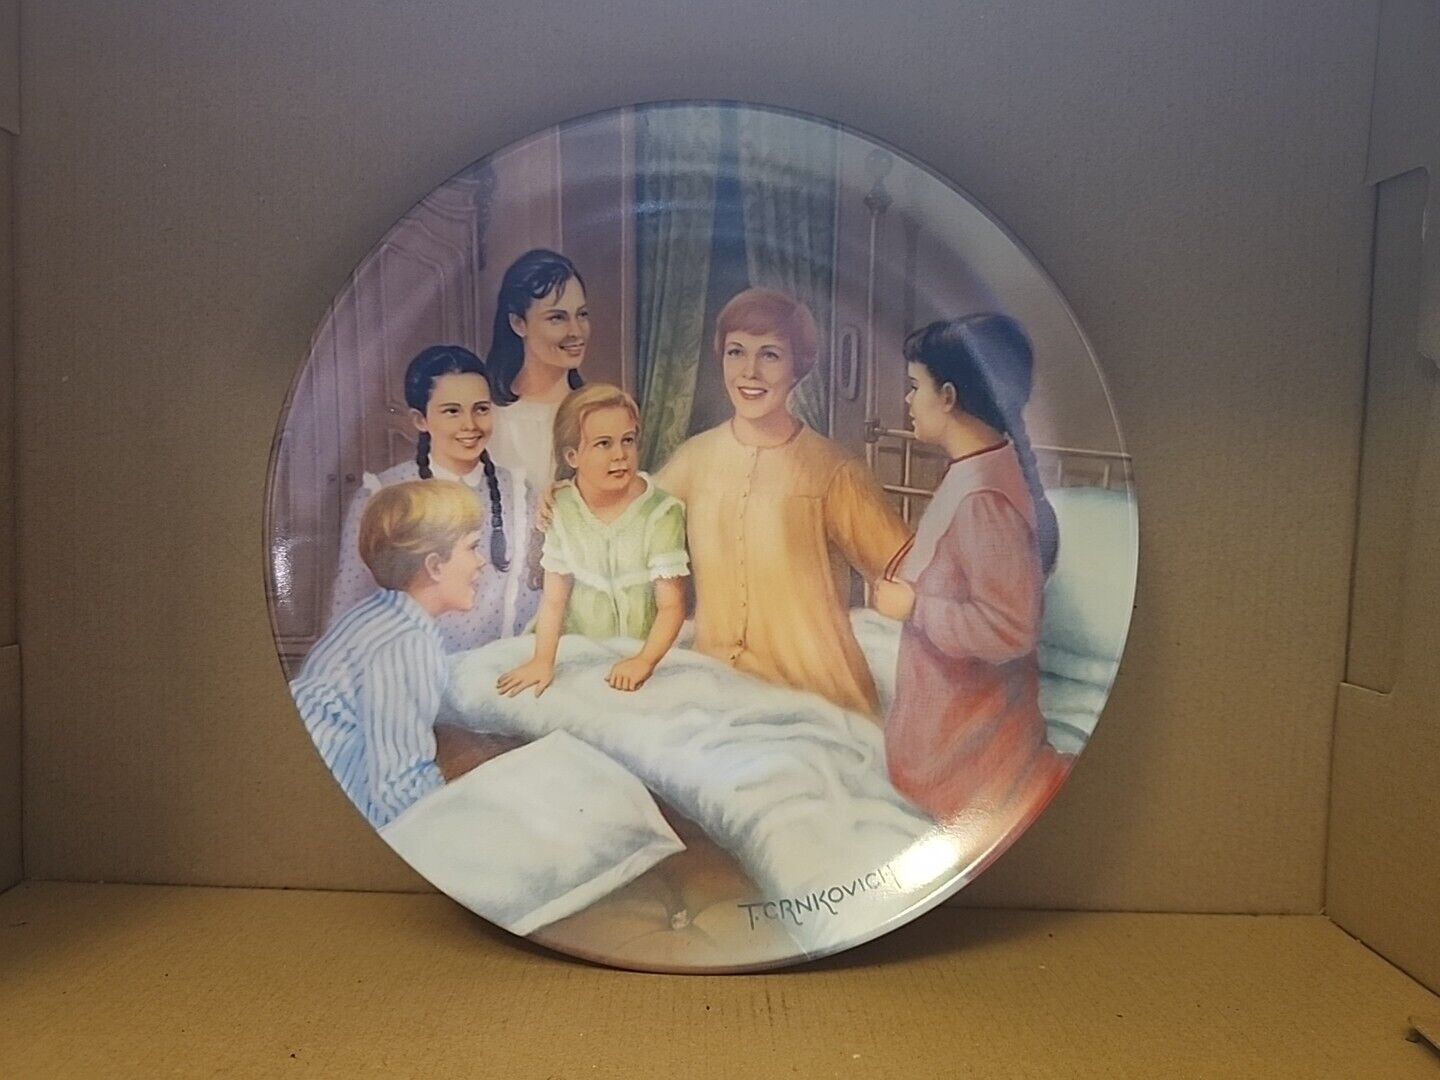 Vintage 1986 The Sound Of Music Collector Plate by Knowles Third Plate in Series